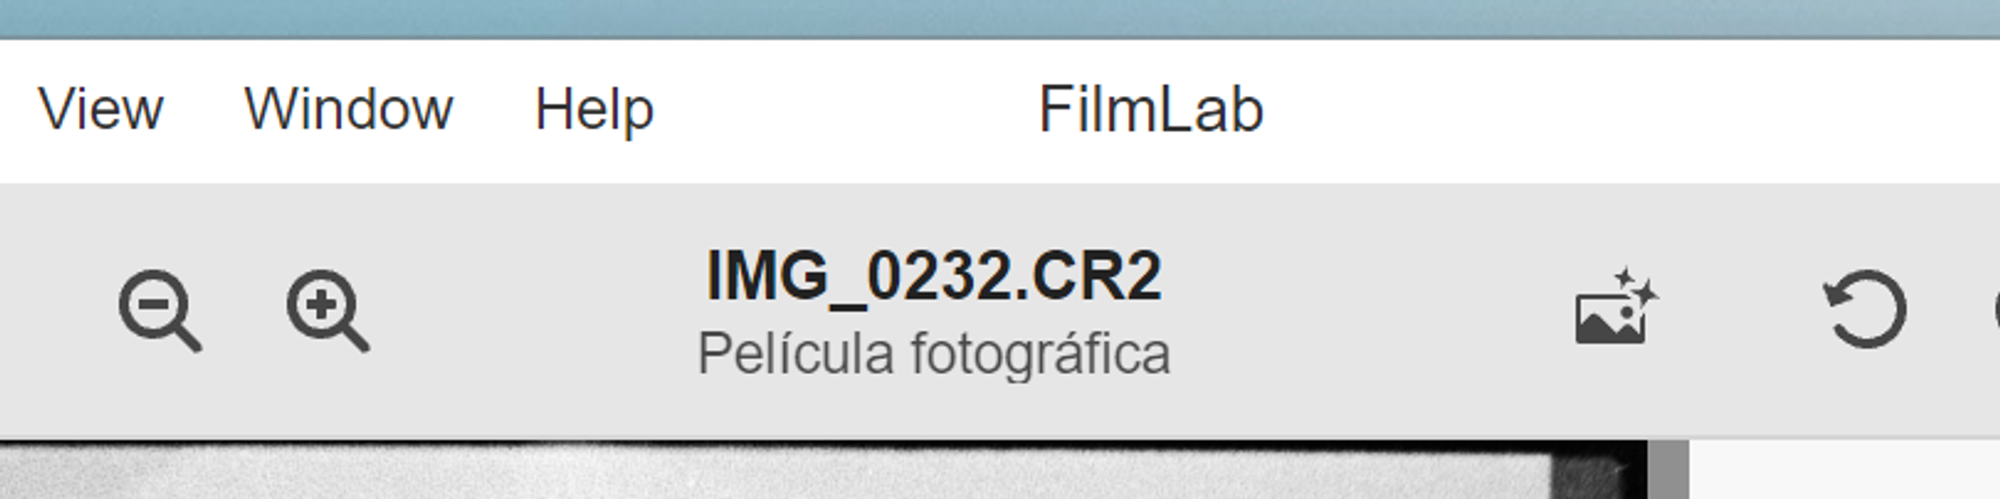 Non-English characters in your directory name? No problem with FilmLab 2.5